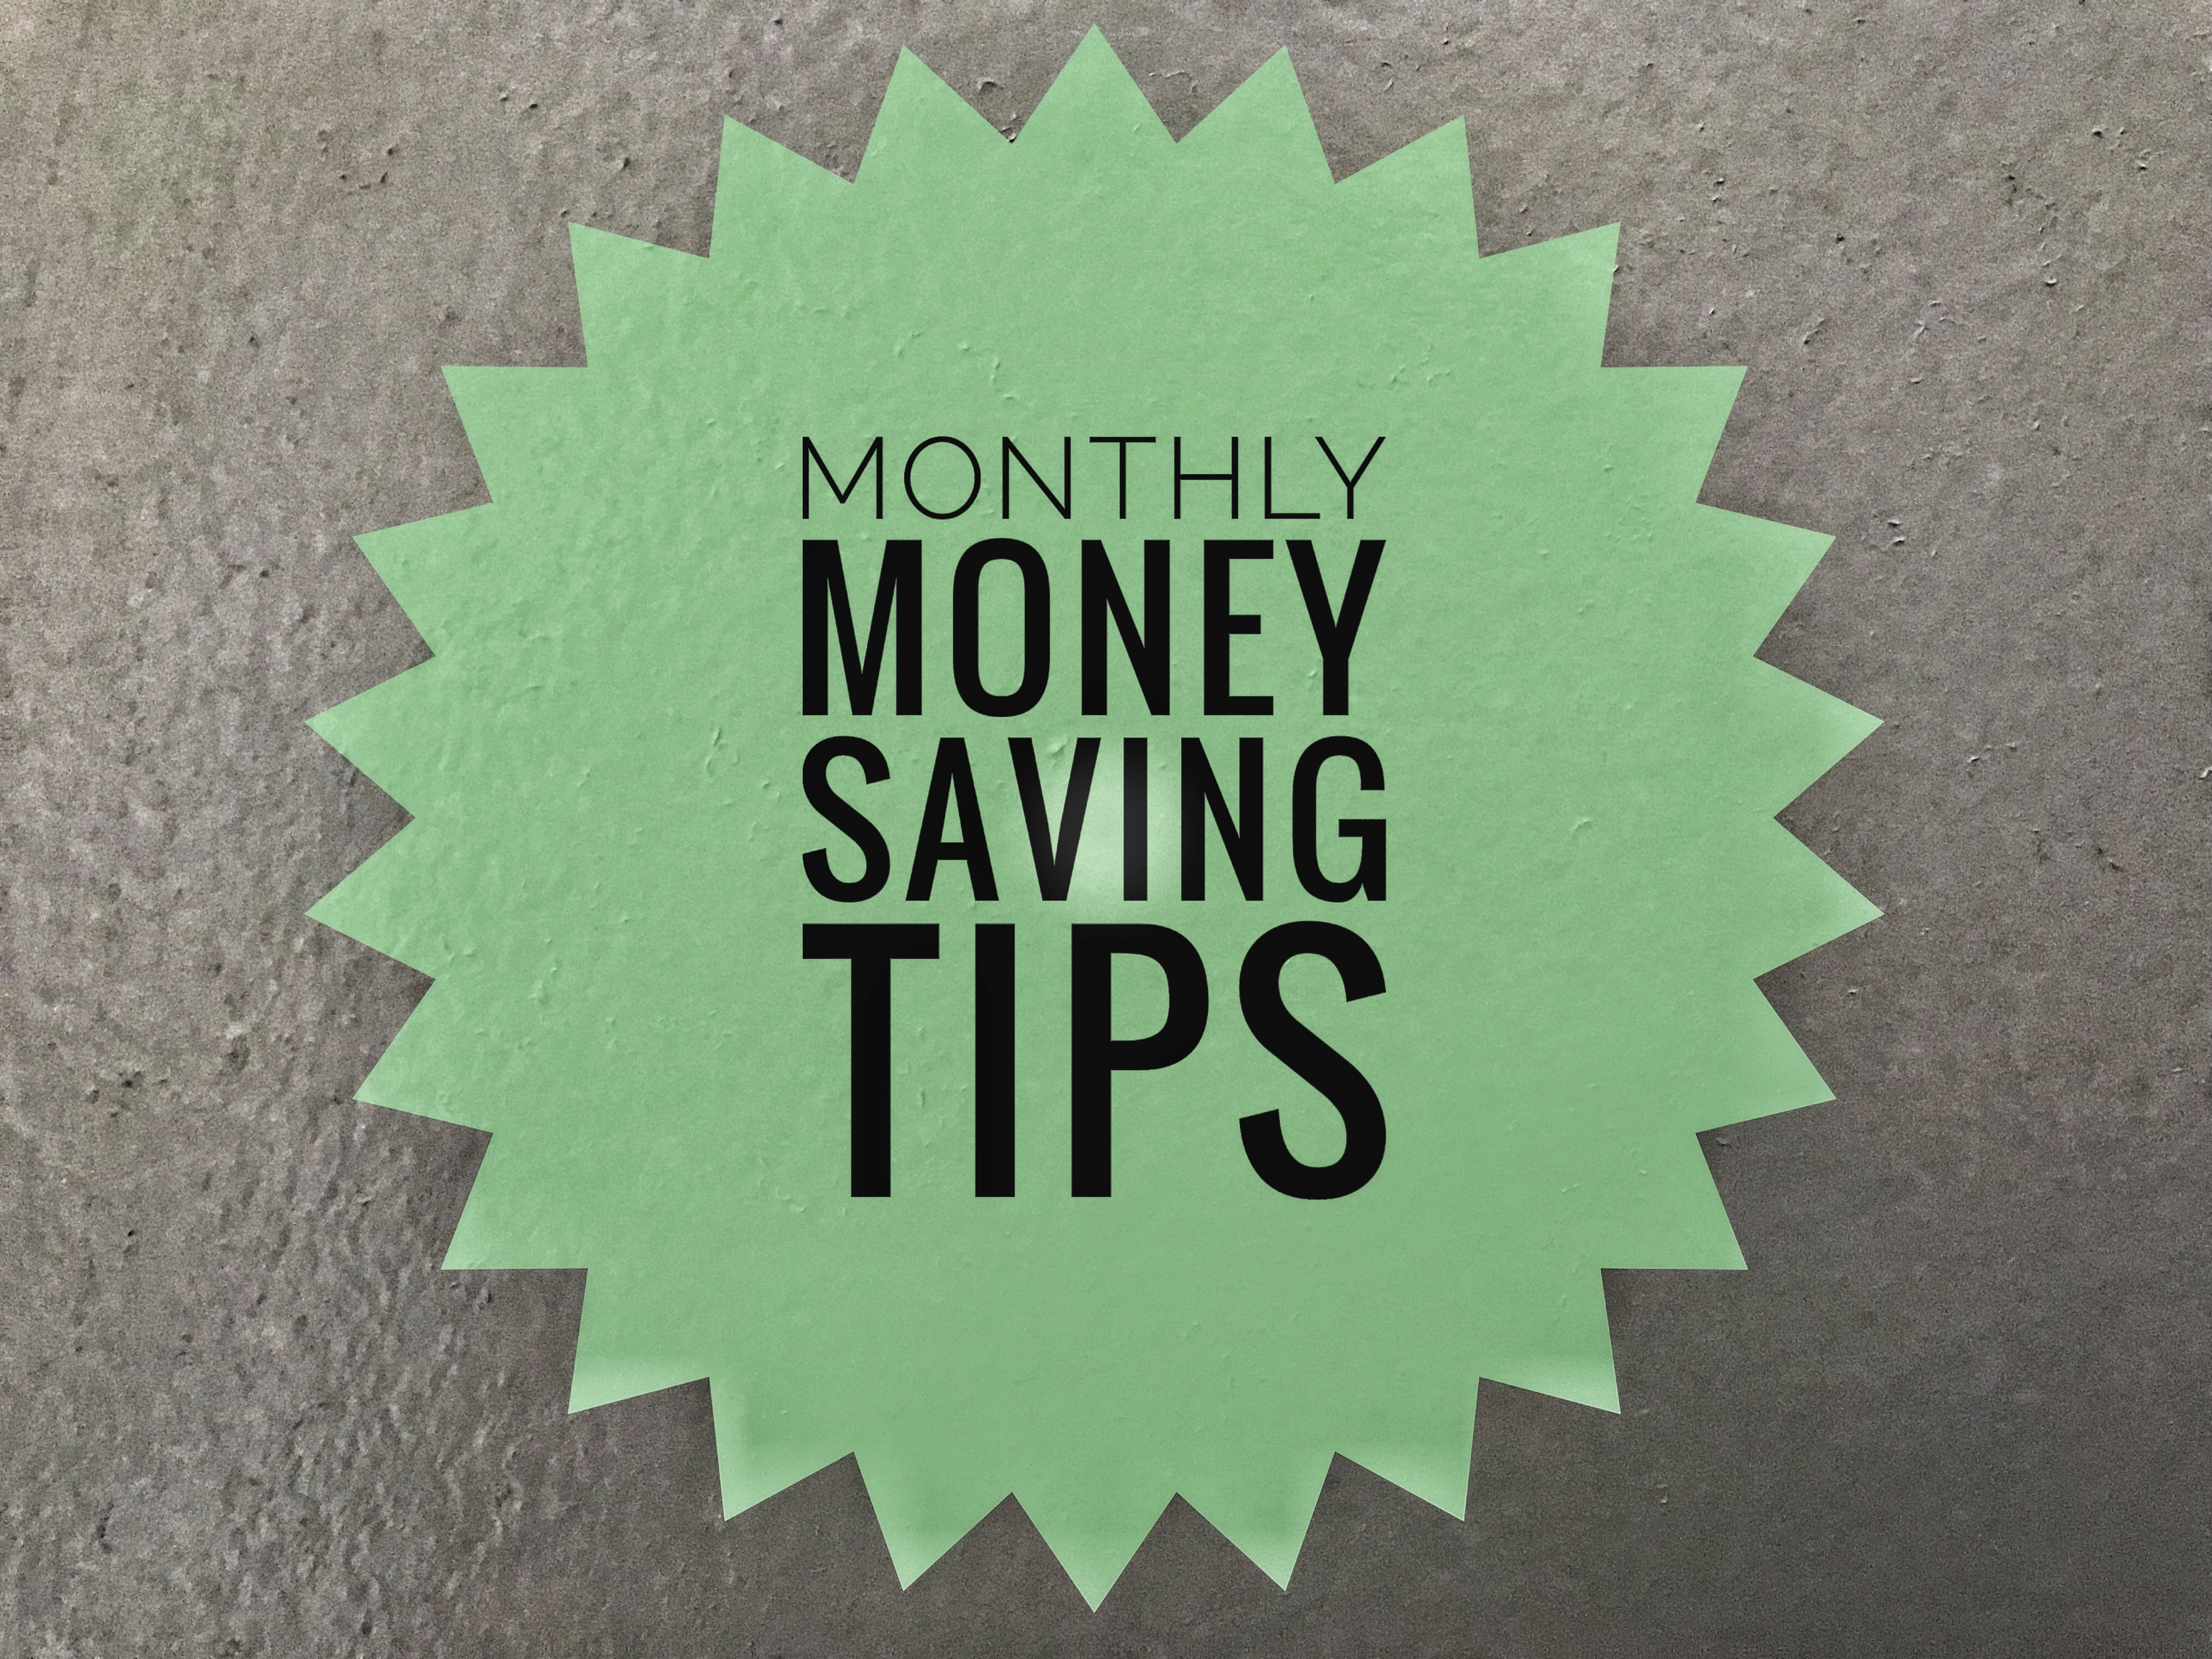 Tips on How to Save Money Monthly